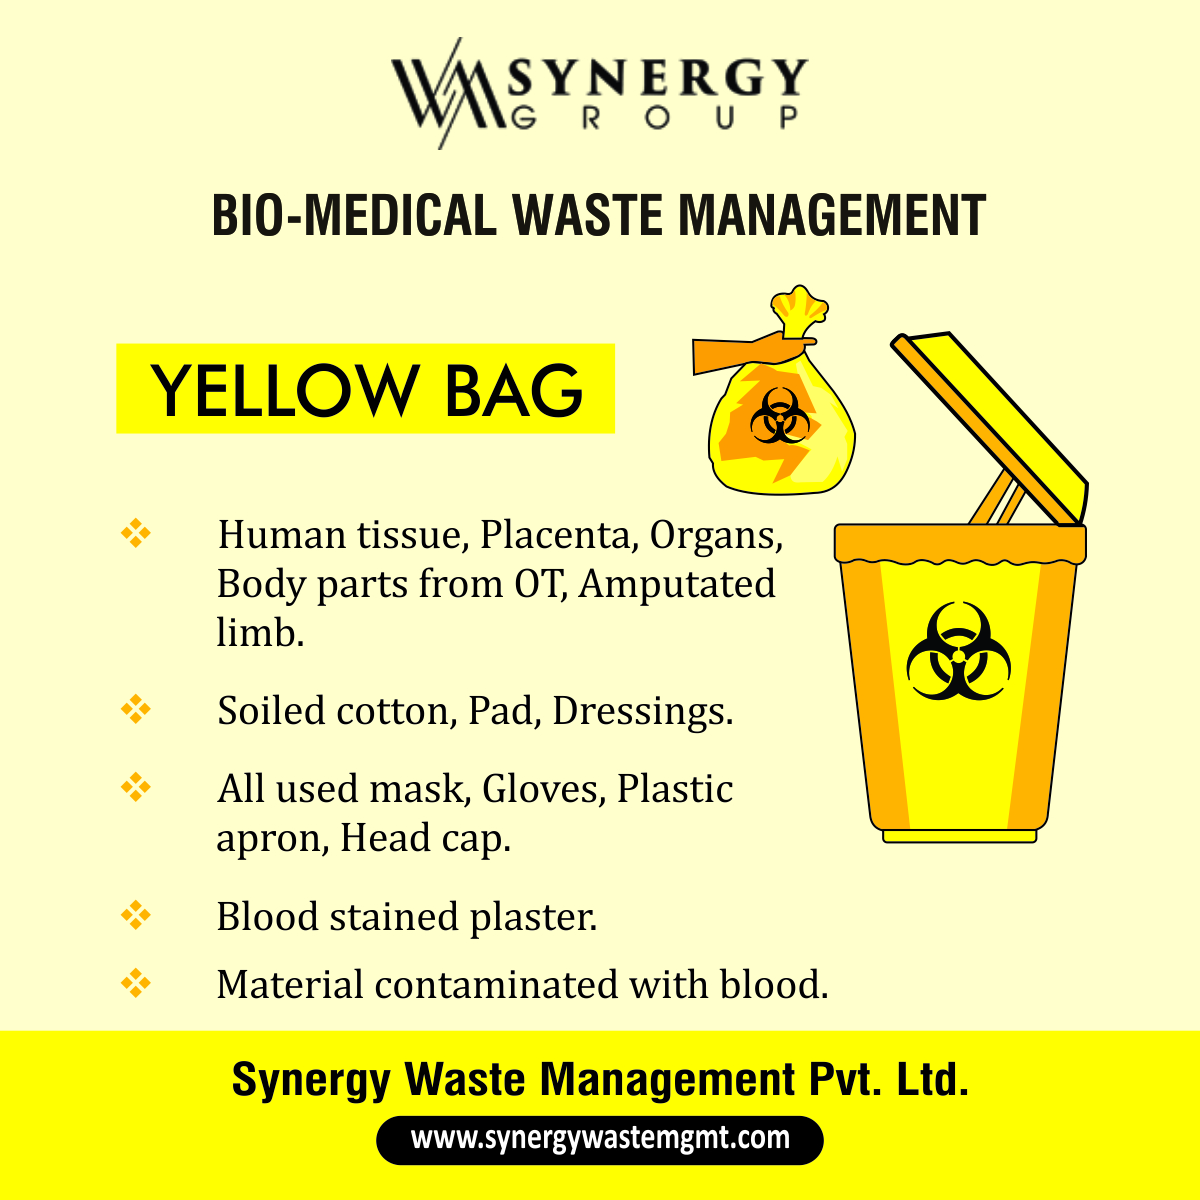 Medical care is vital for our life and health but improper management of the by-products can pose a serious threat to community and #environment. At #SynergyGroup, we are the leading organization to offer precious clients an optimum quality #BioMedicalWaste Management Services. https://t.co/i6zgHh2OJk